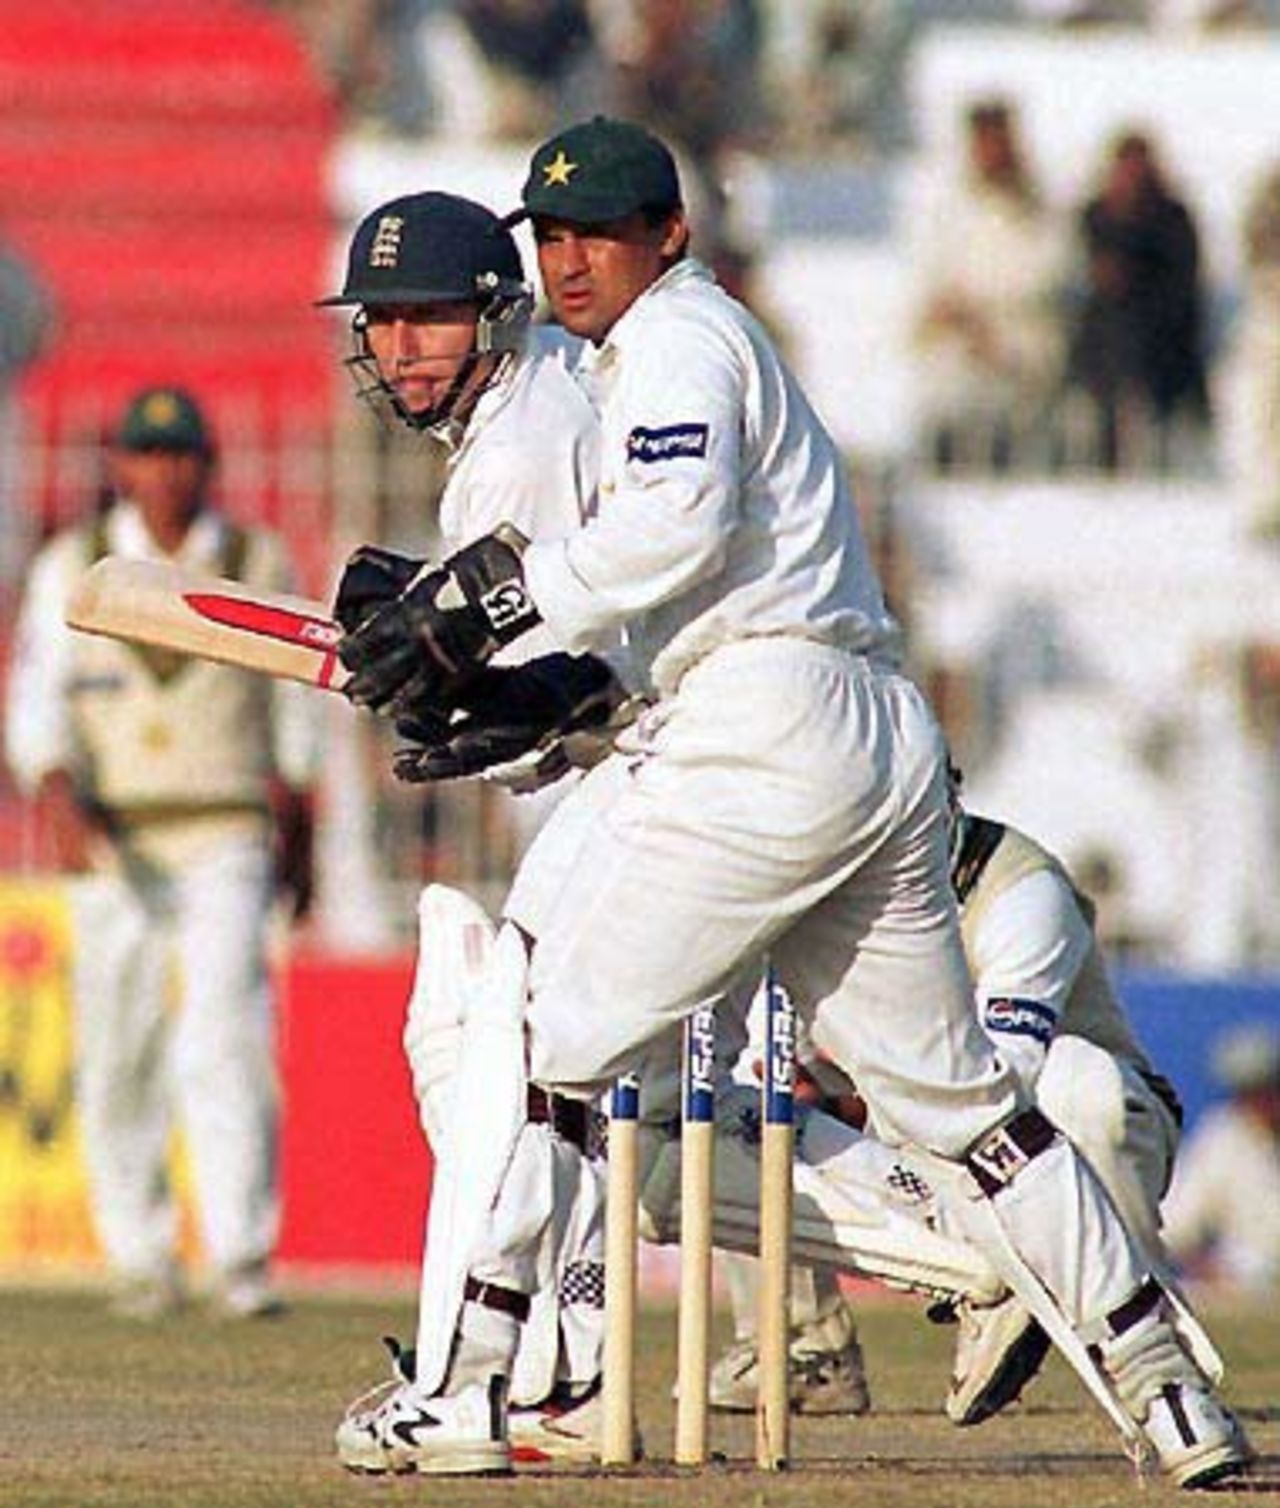 Atherton tracking the ball as he glances it towards fine leg, Day 5, 2nd Test Match, Pakistan v England at Faisalabad, 29 Nov-3 Dec 2000.